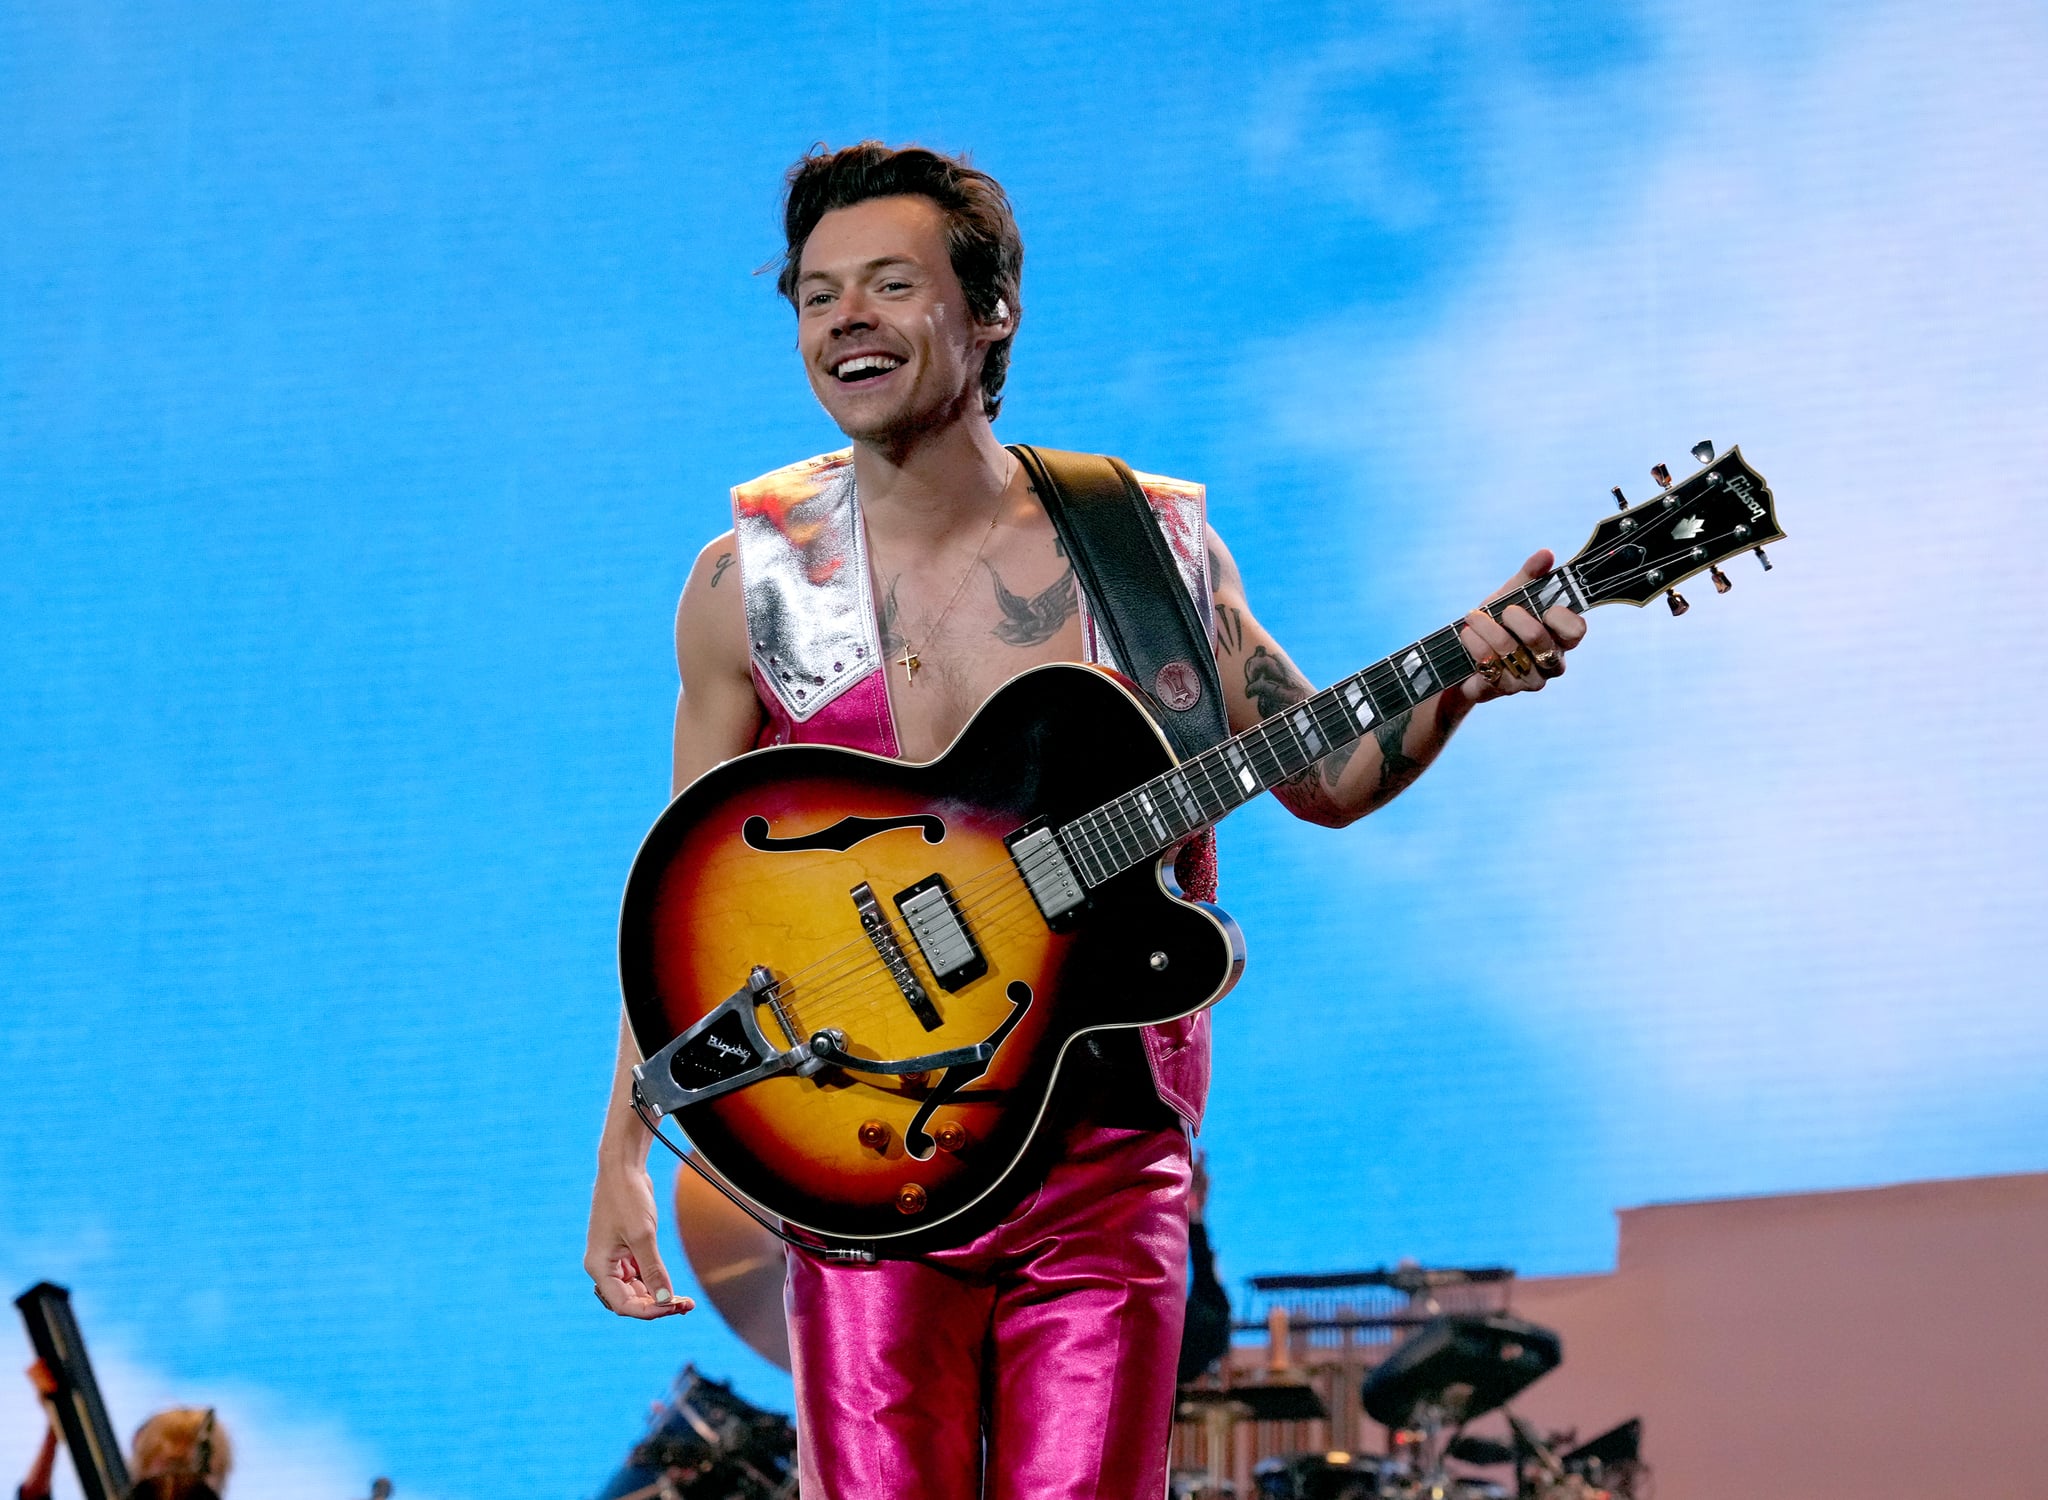 INDIO, CALIFORNIA - APRIL 22: Harry Styles performs on the Coachella stage during the 2022 Coachella Valley Music And Arts Festival on April 22, 2022 in Indio, California. (Photo by Kevin Mazur/Getty Images for Harry Styles)